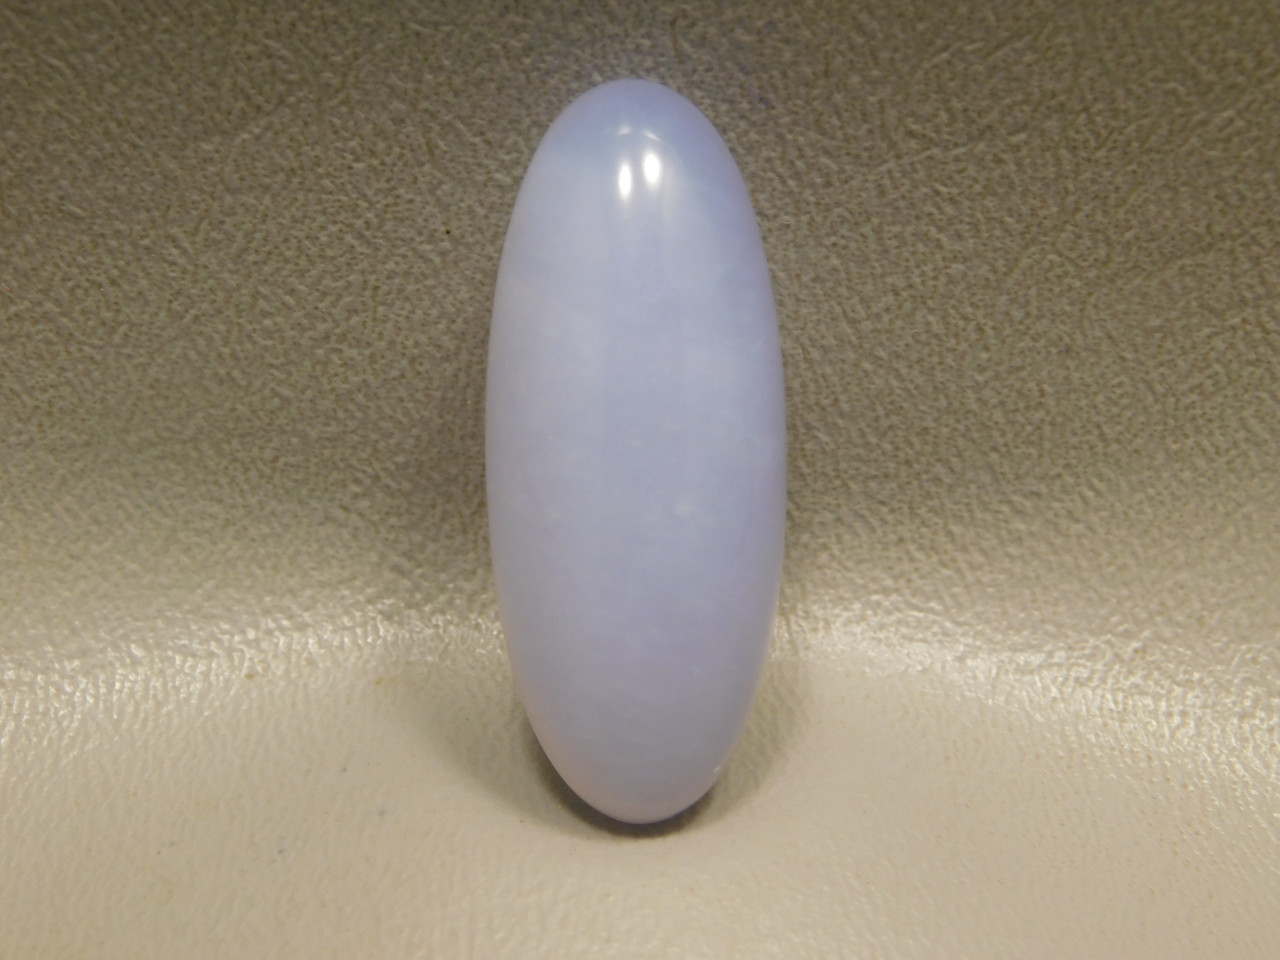 Blue Chalcedony Jewelry Making Supplies Cabochon Stone #3